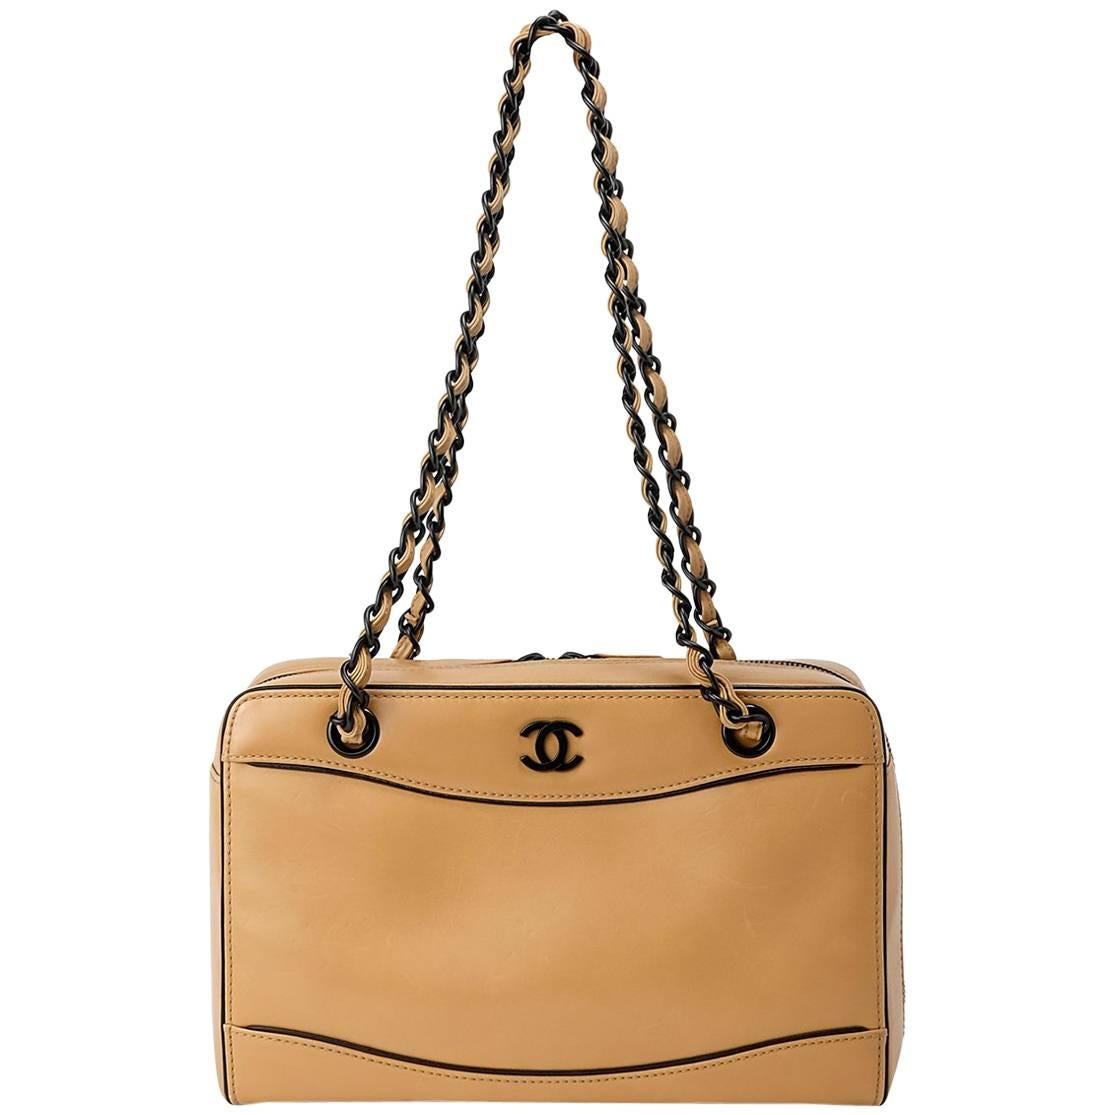 Chanel Early 2000 Beige and Black Calfskin Shoulder Bag With Long Handles  For Sale